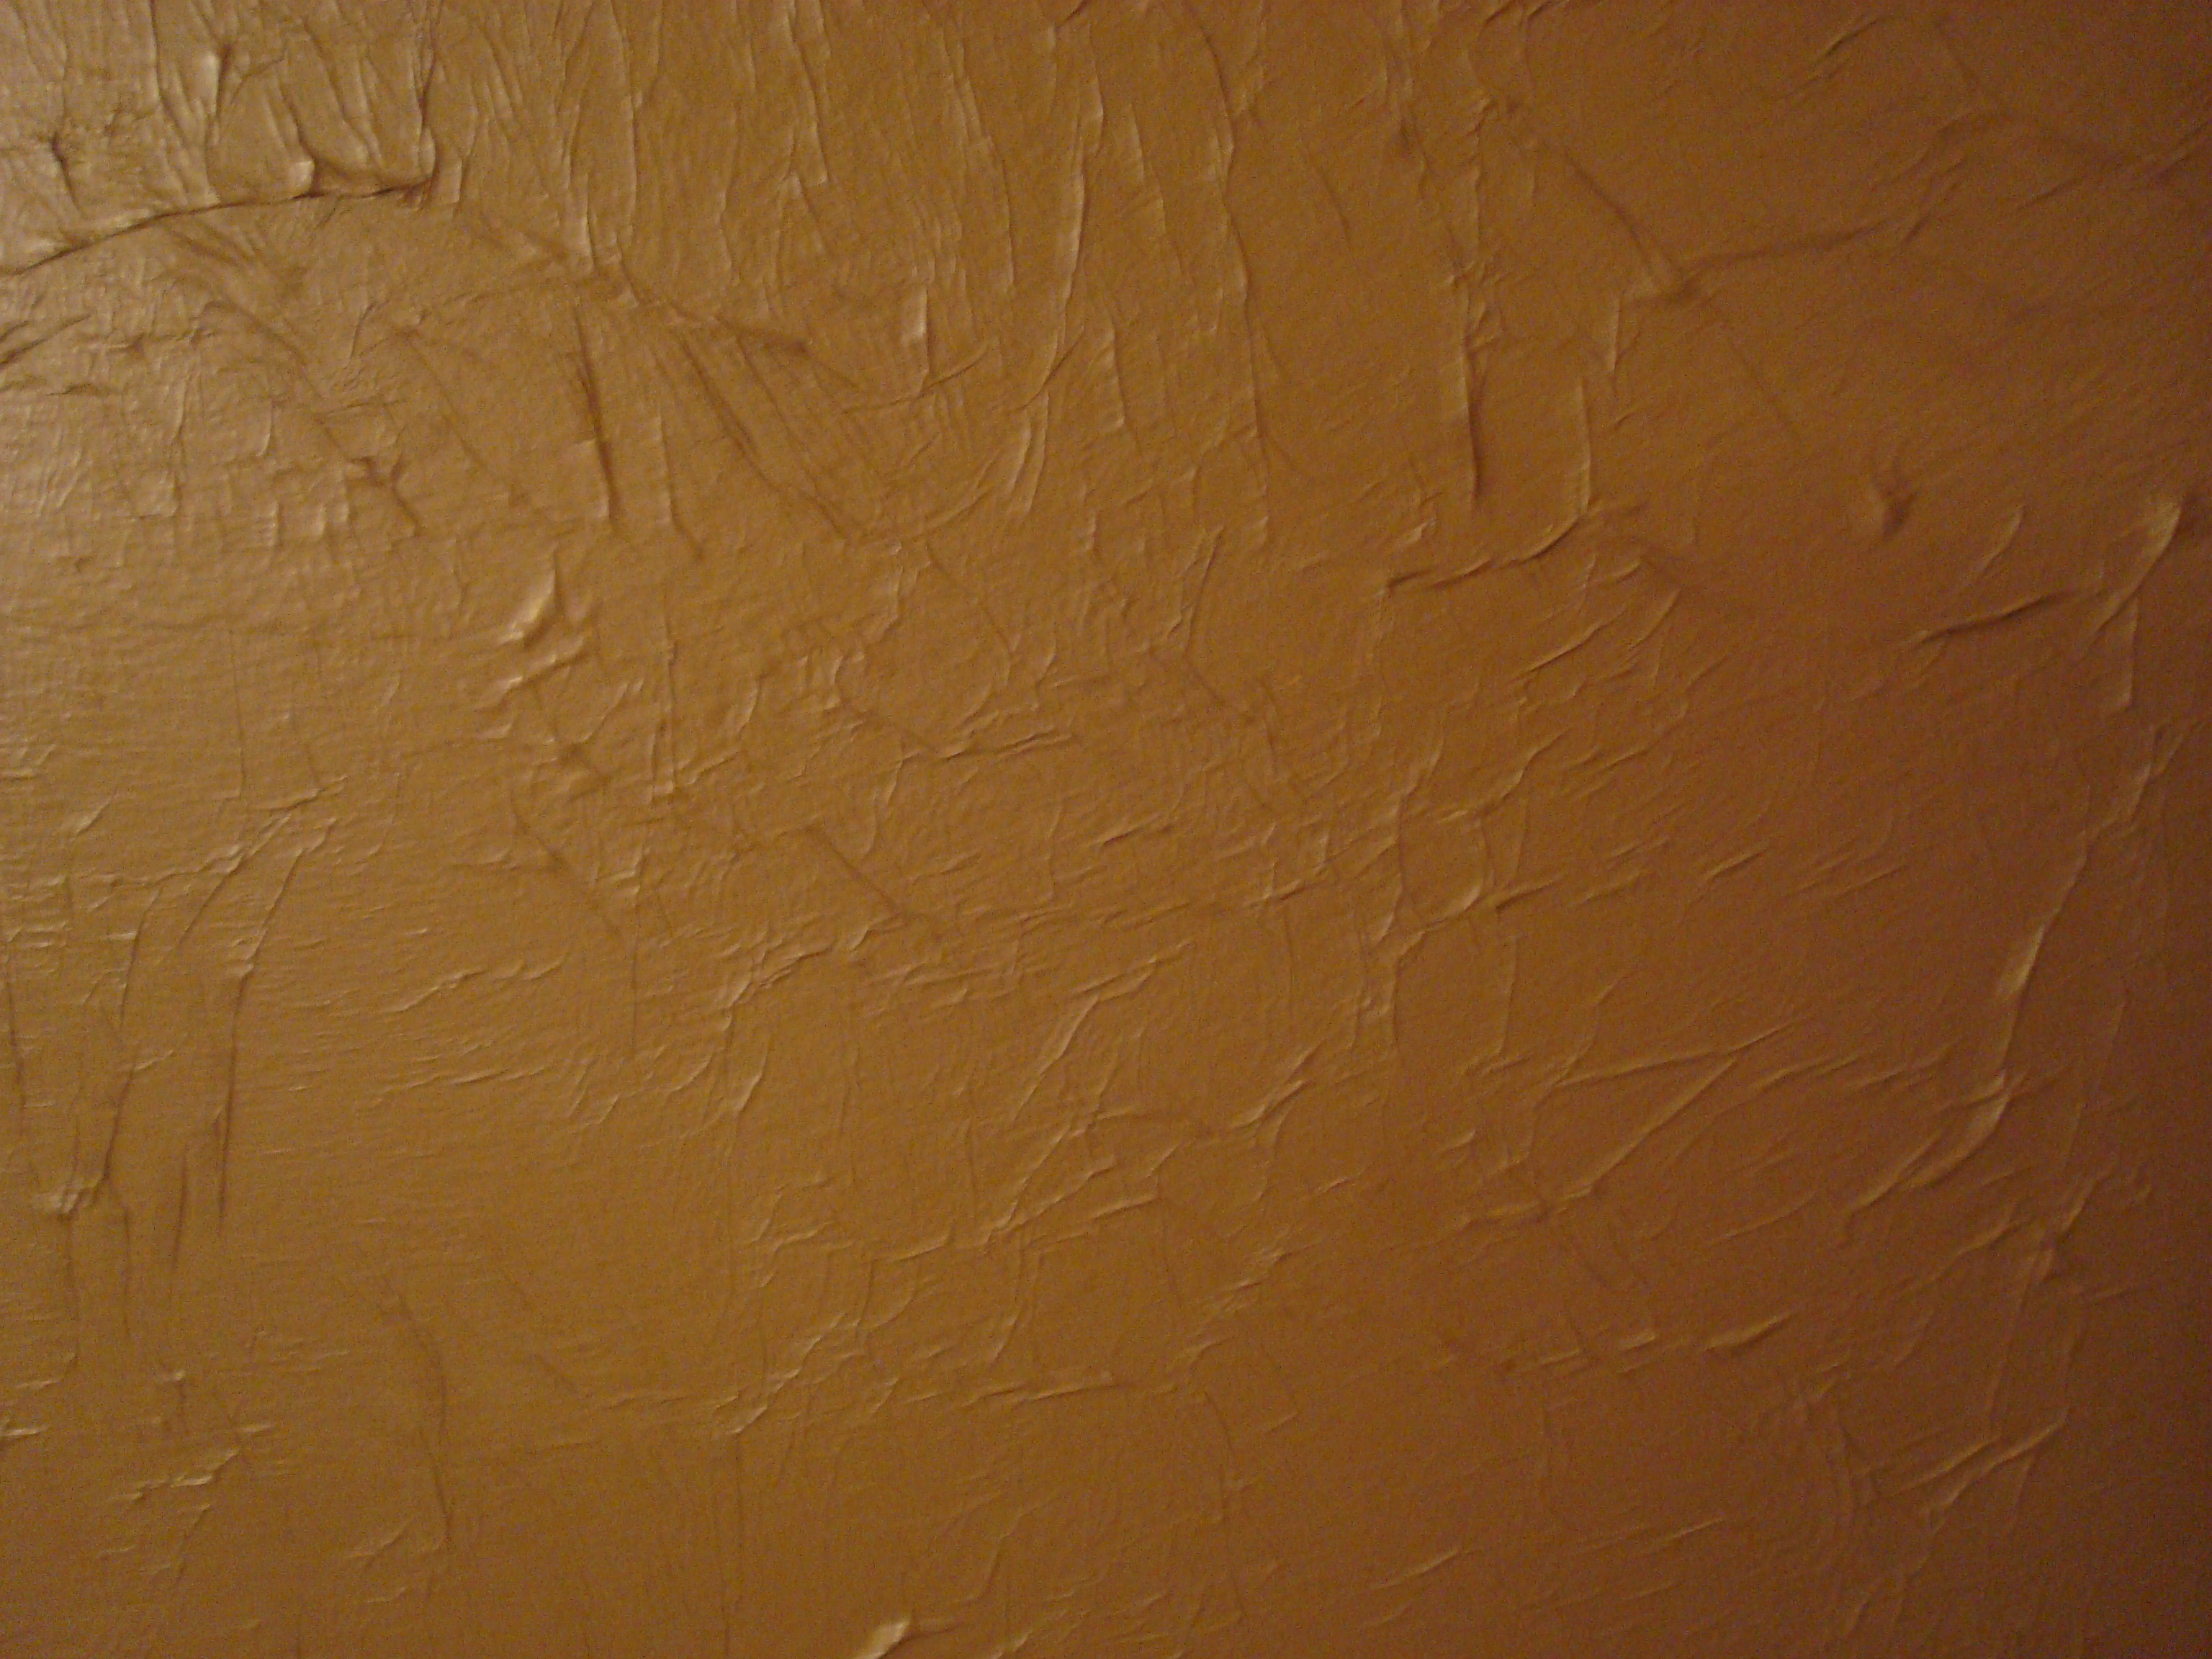 Brown Walls Are All Tissue Papered The Pink Just